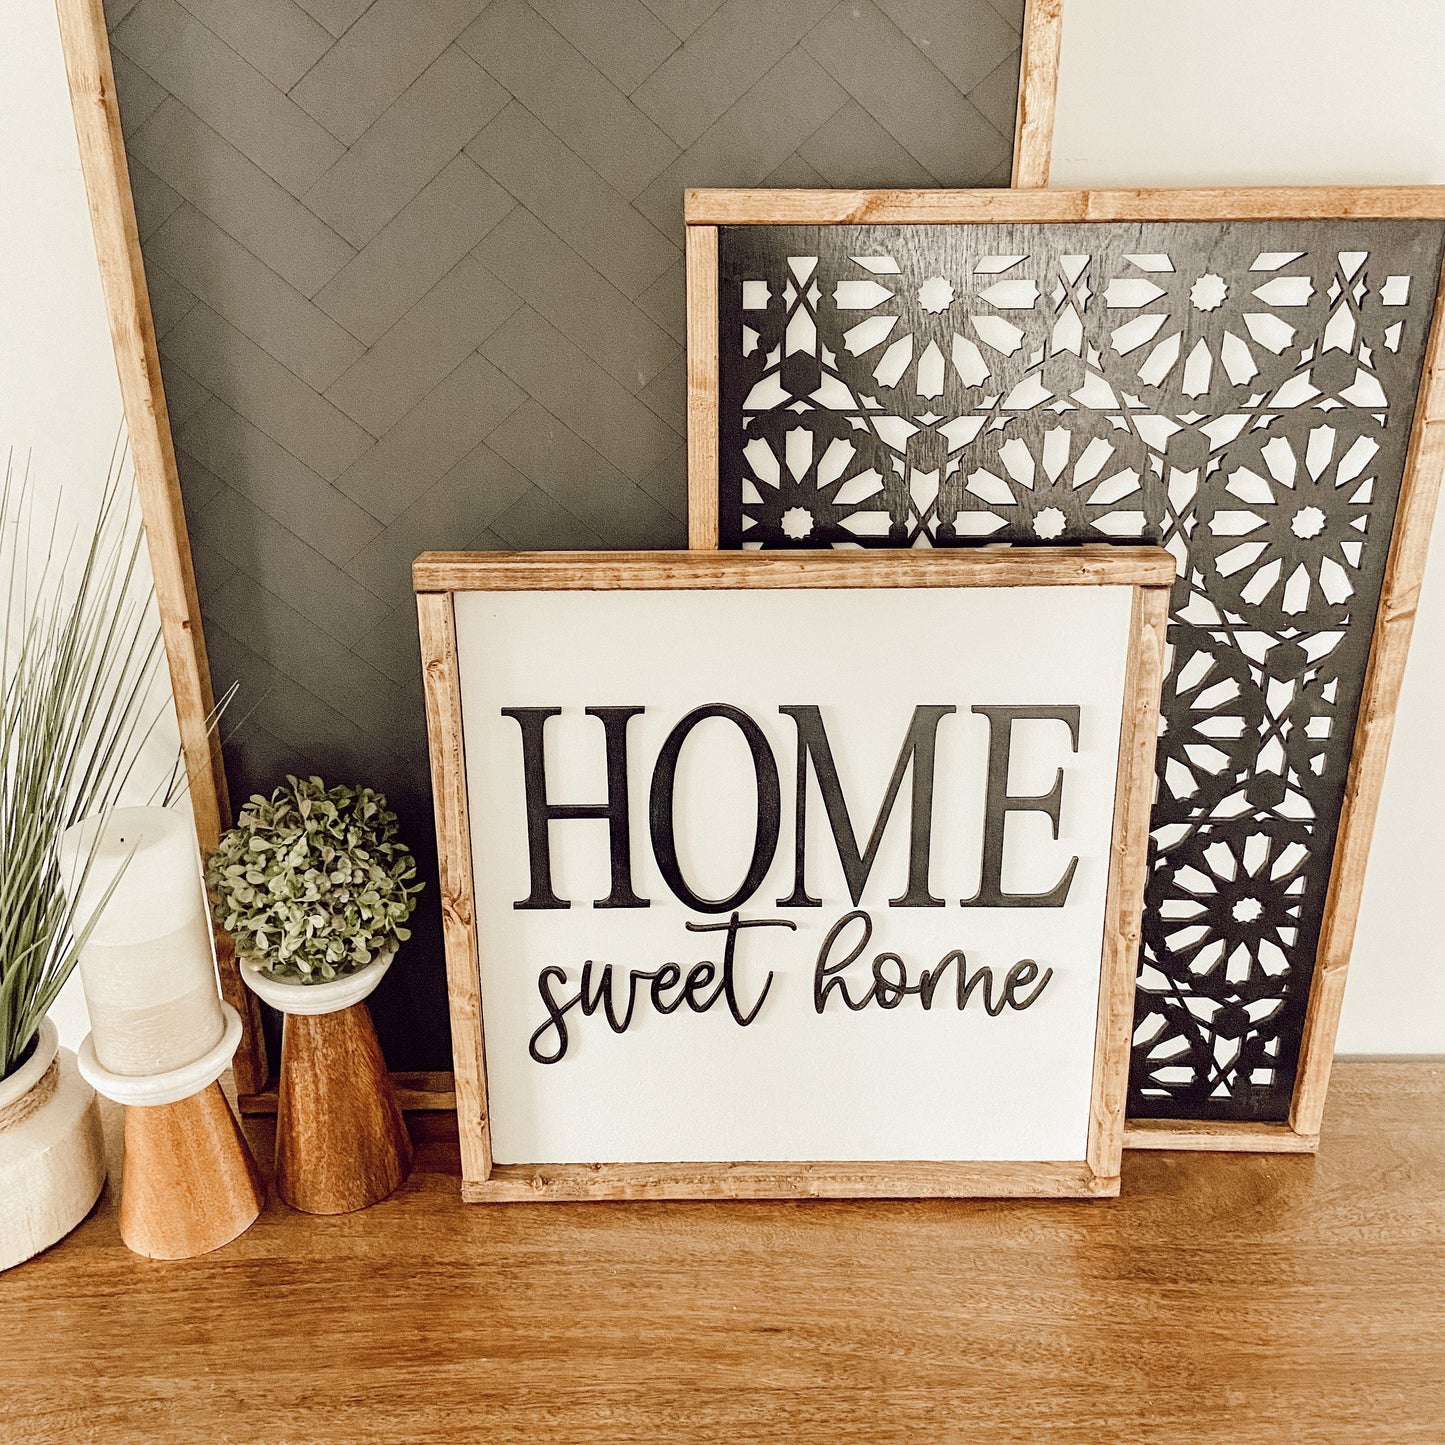 home sweet home - entryway, living room sign [FREE SHIPPING!]